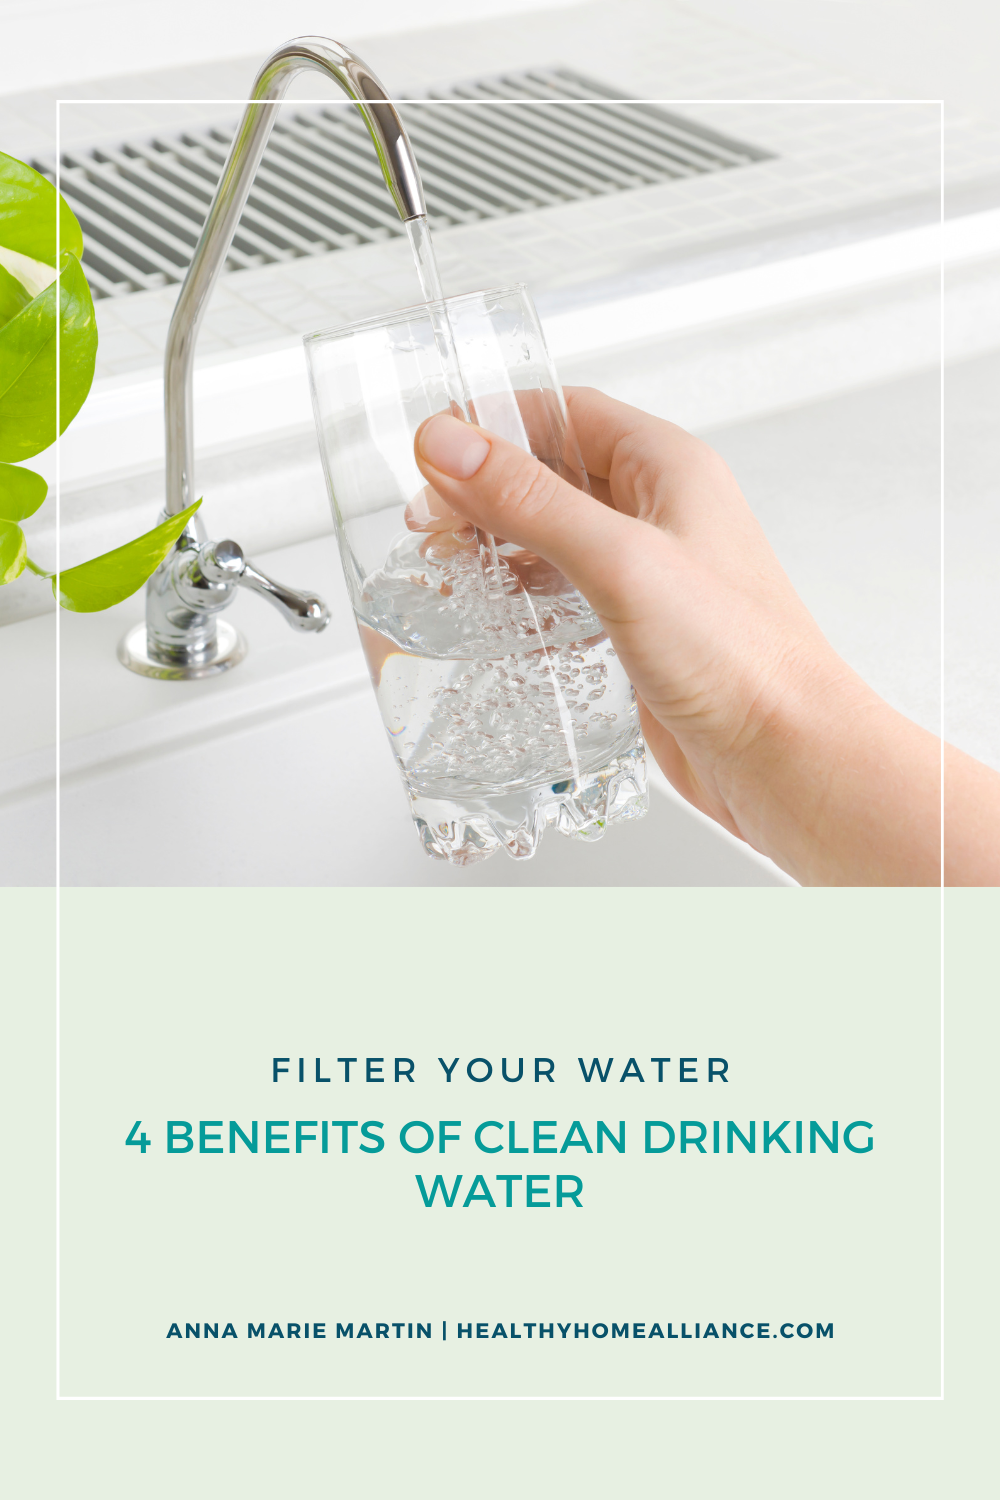 Filter Your Water